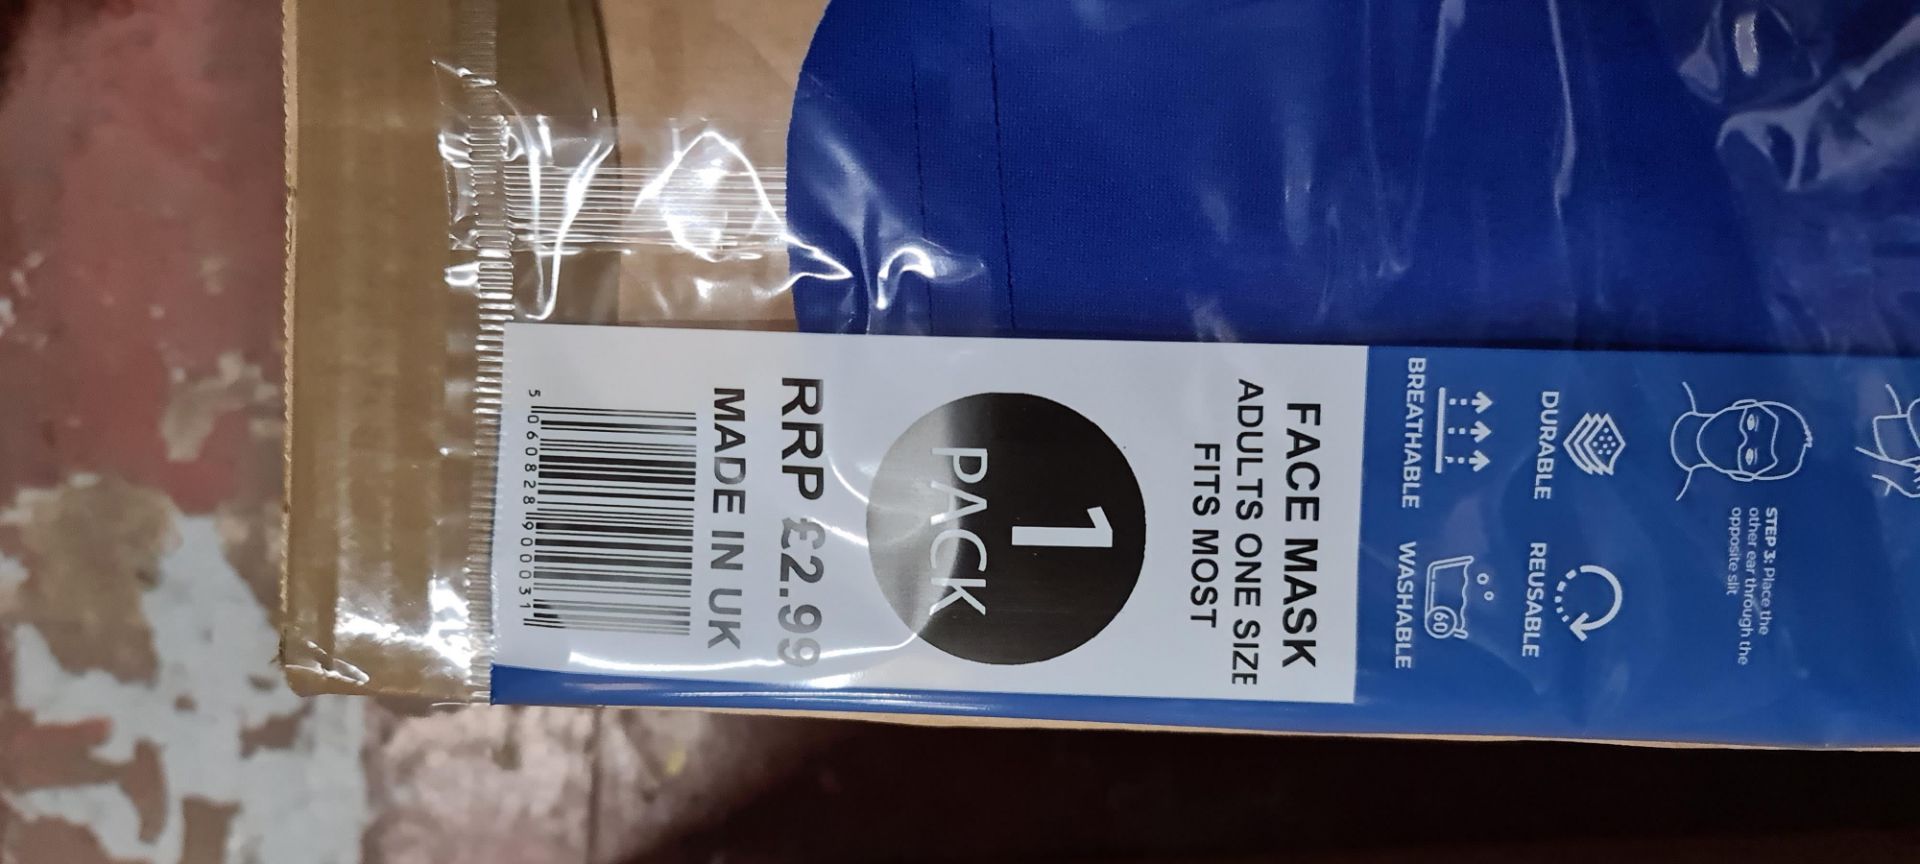 100 off adult face masks, individually packaged, in royal blue - Image 6 of 7